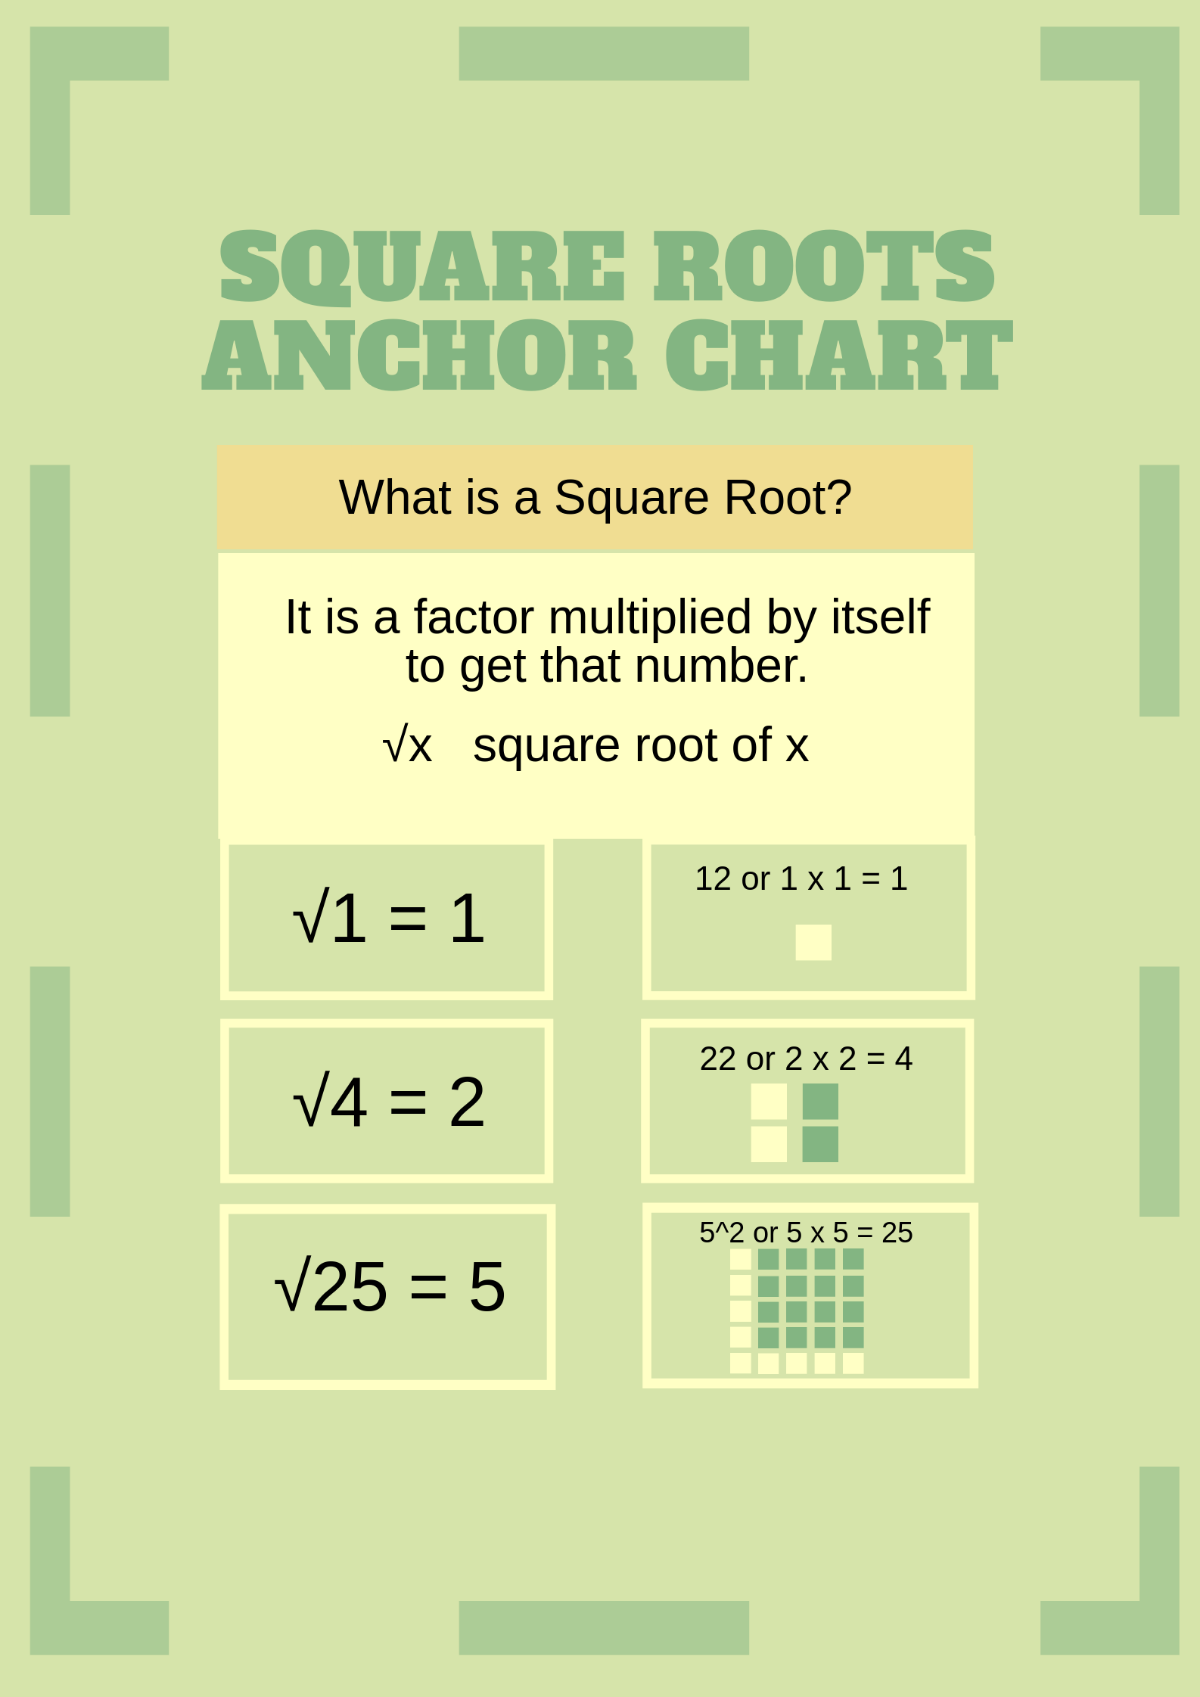 Square Roots Anchor Chart Template